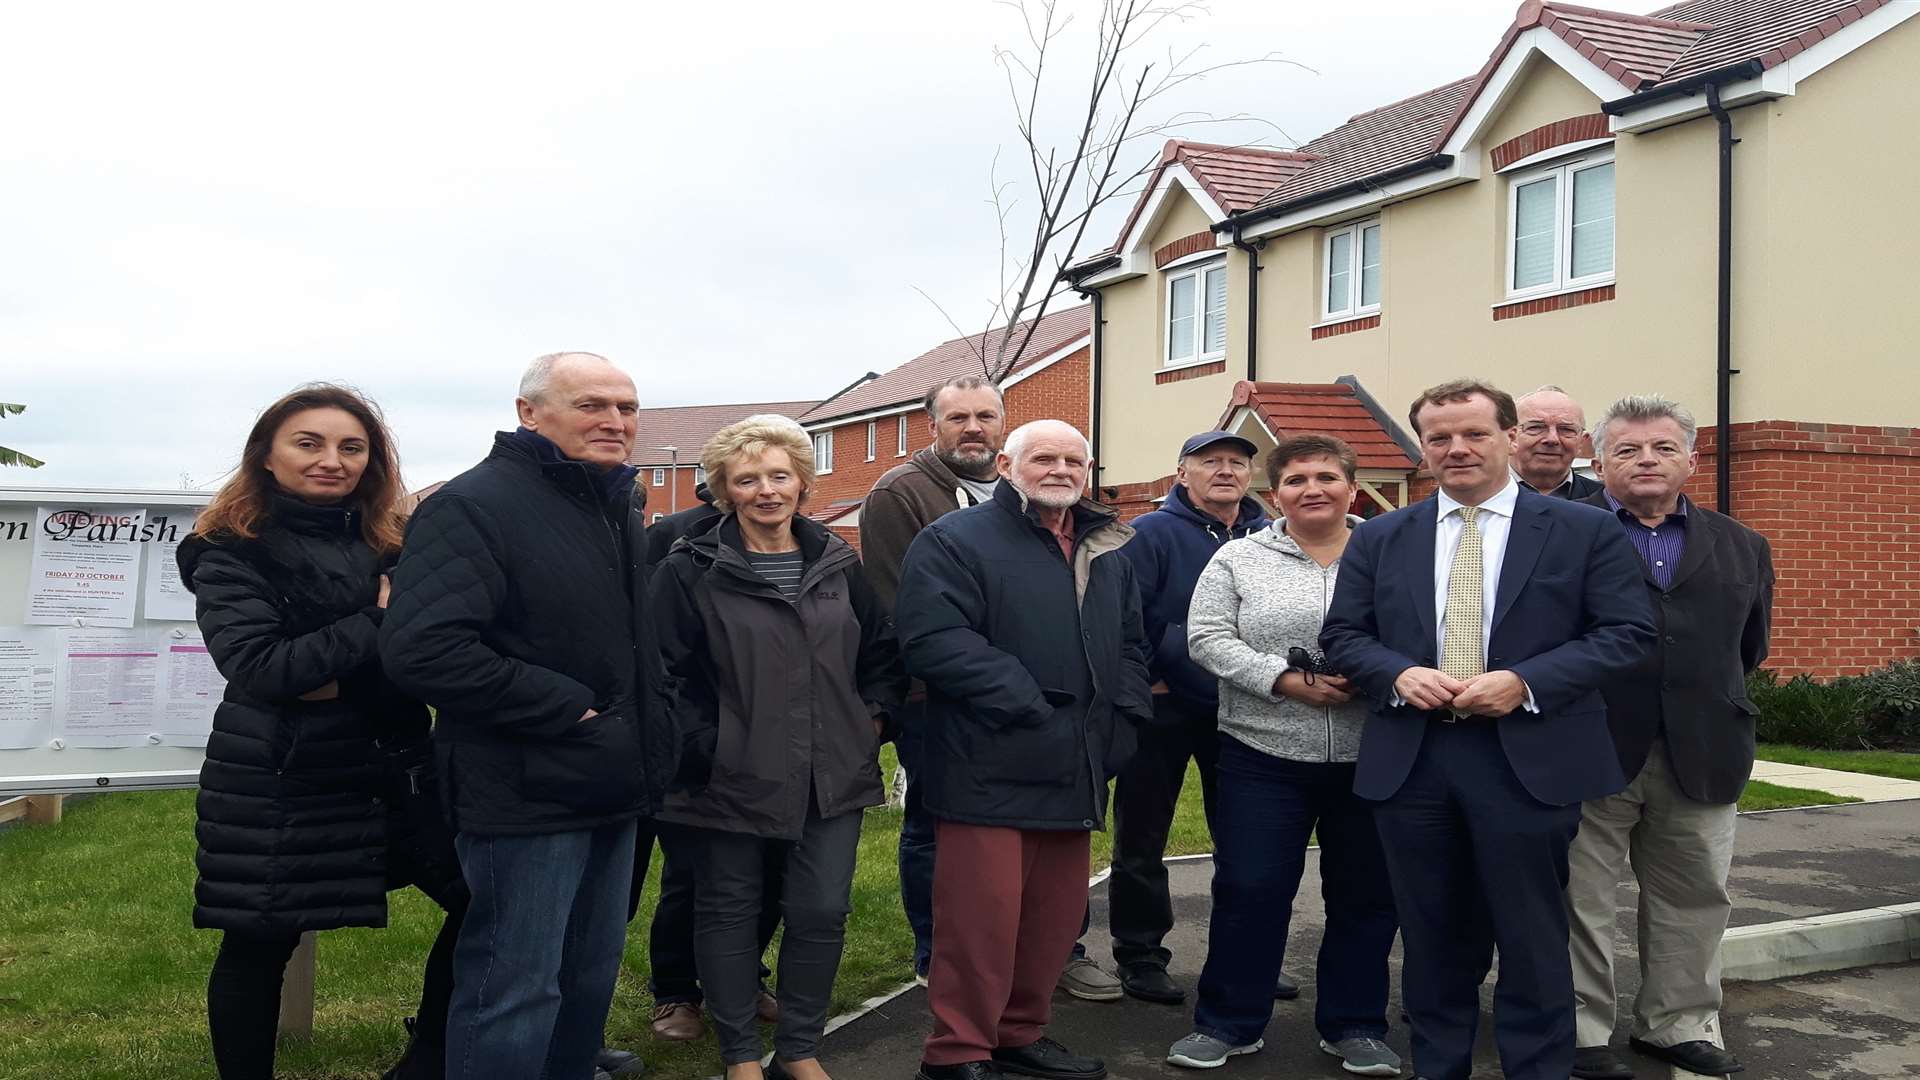 MP Charlie Elphicke met with residents to discuss problems with the Persimmon housing development